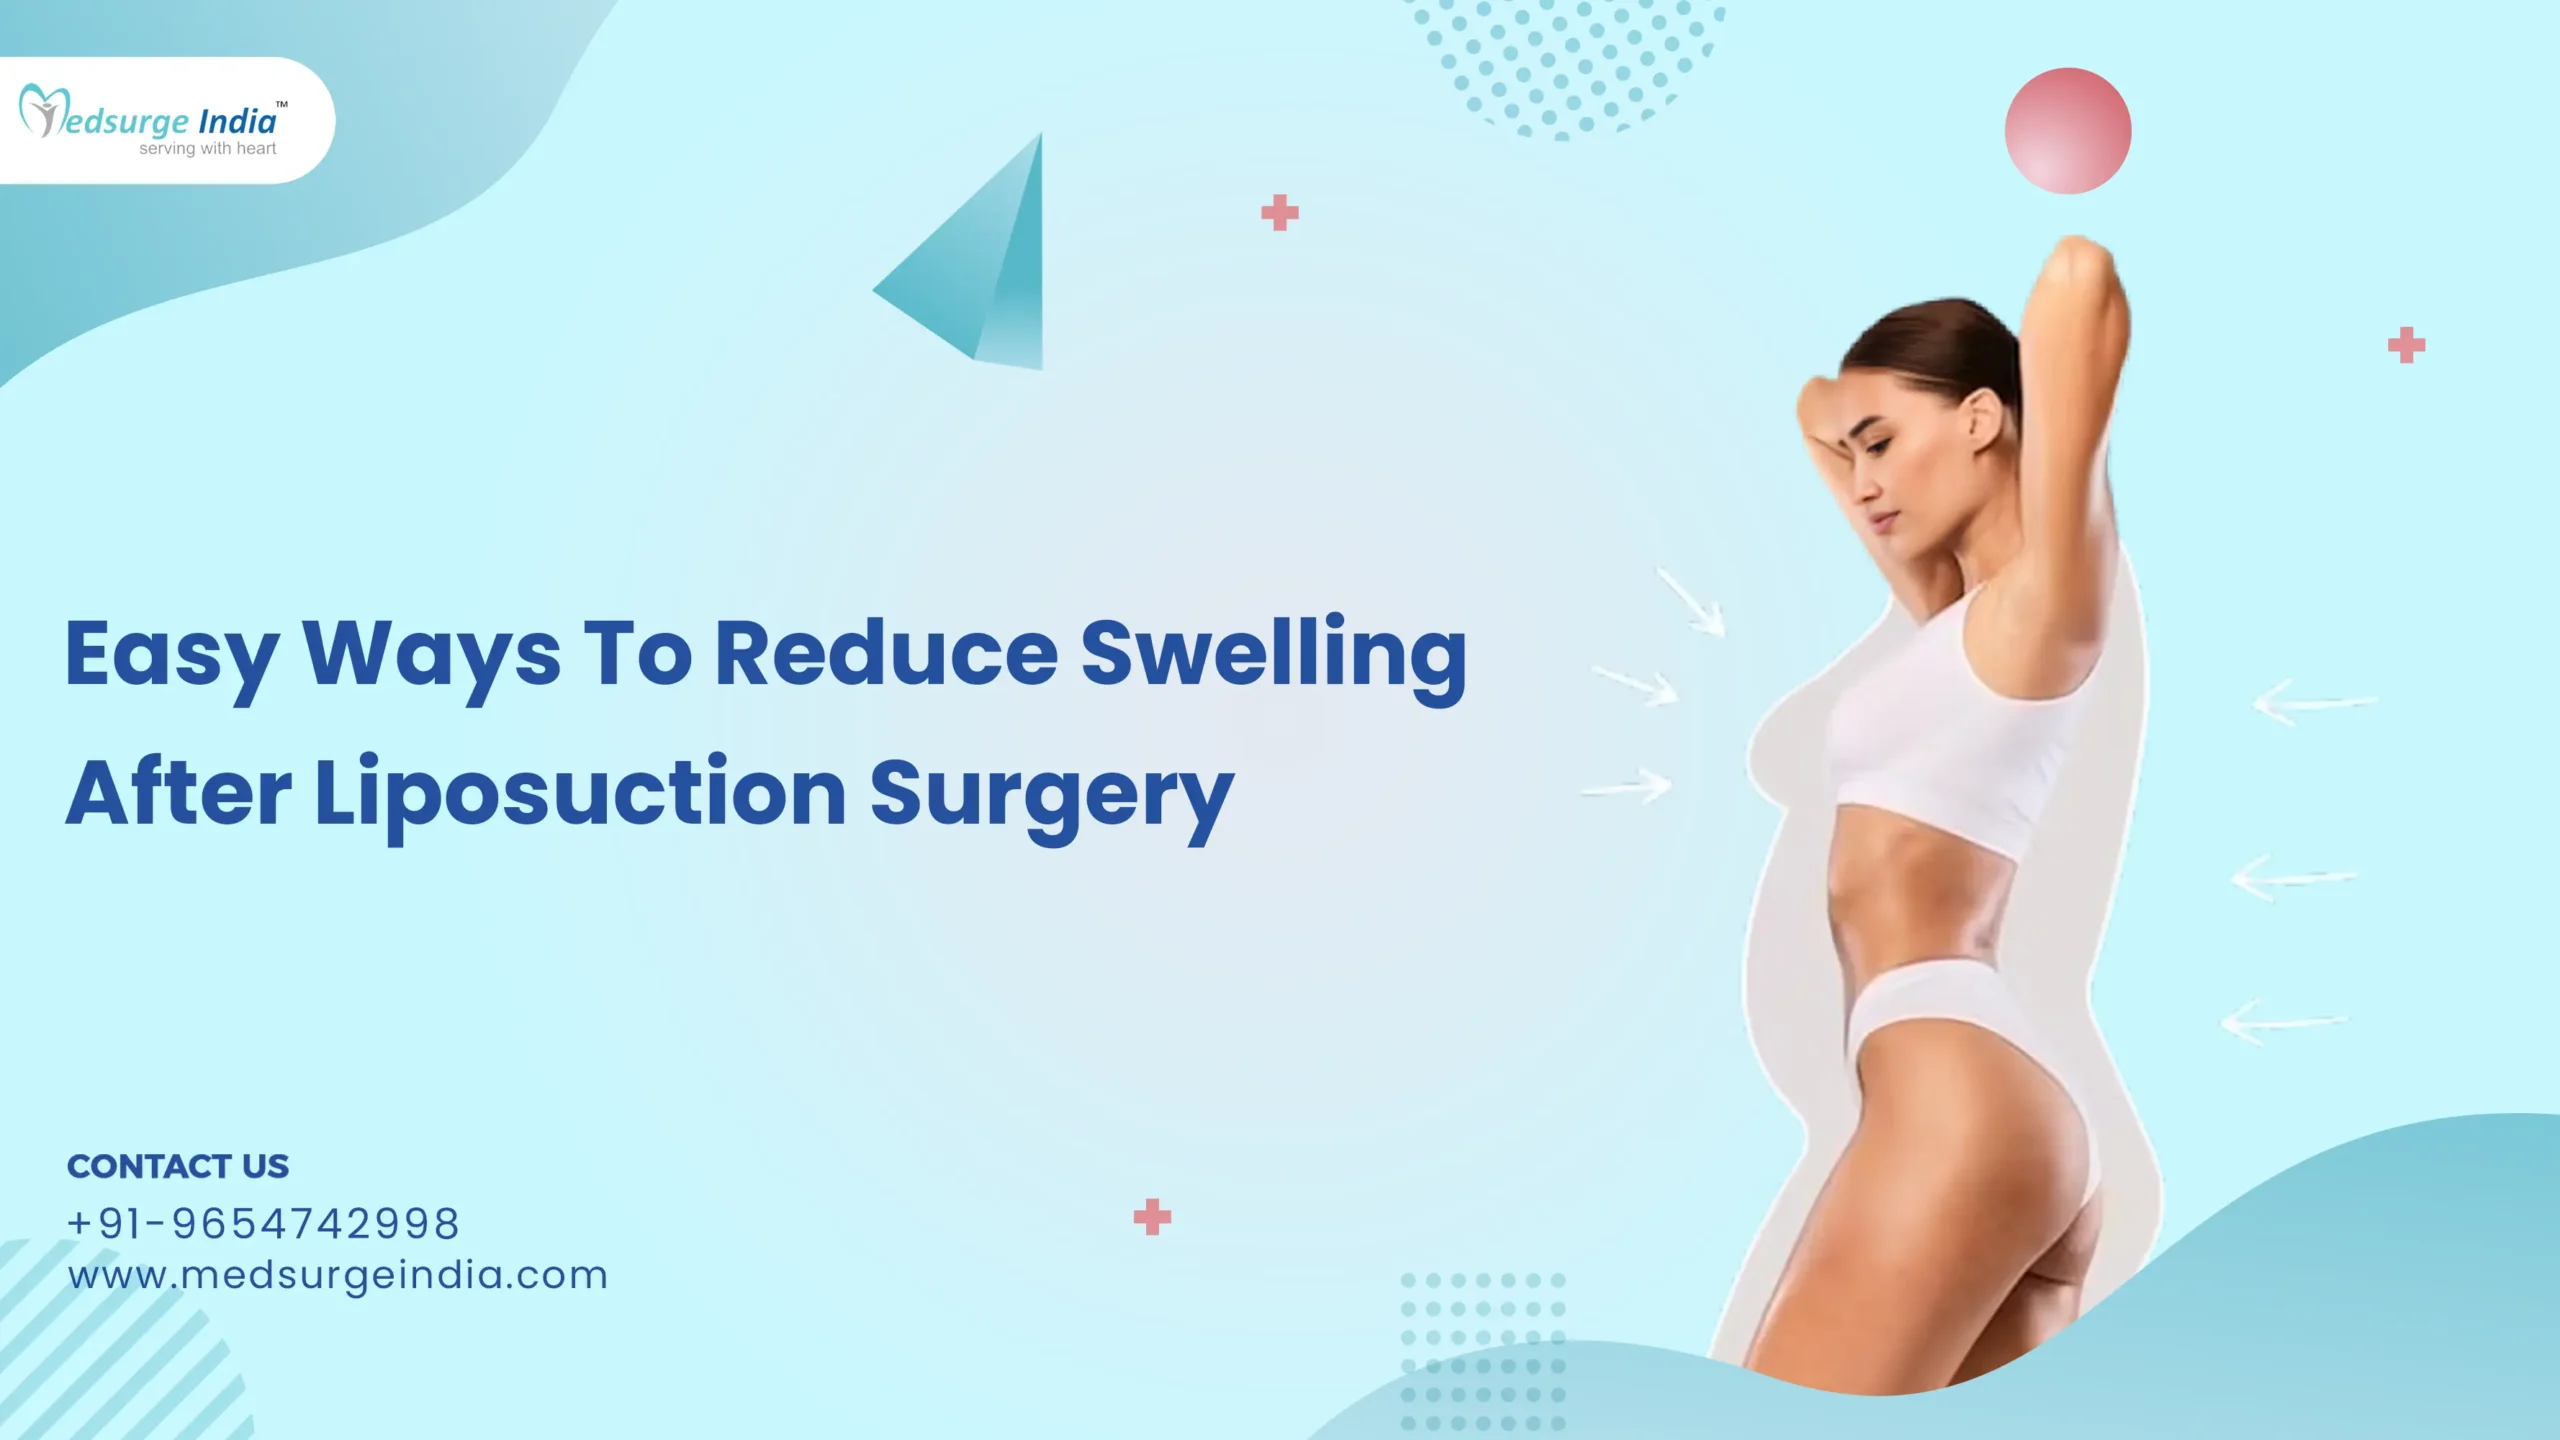 Easy Ways To Reduce Swelling After Liposuction Surgery